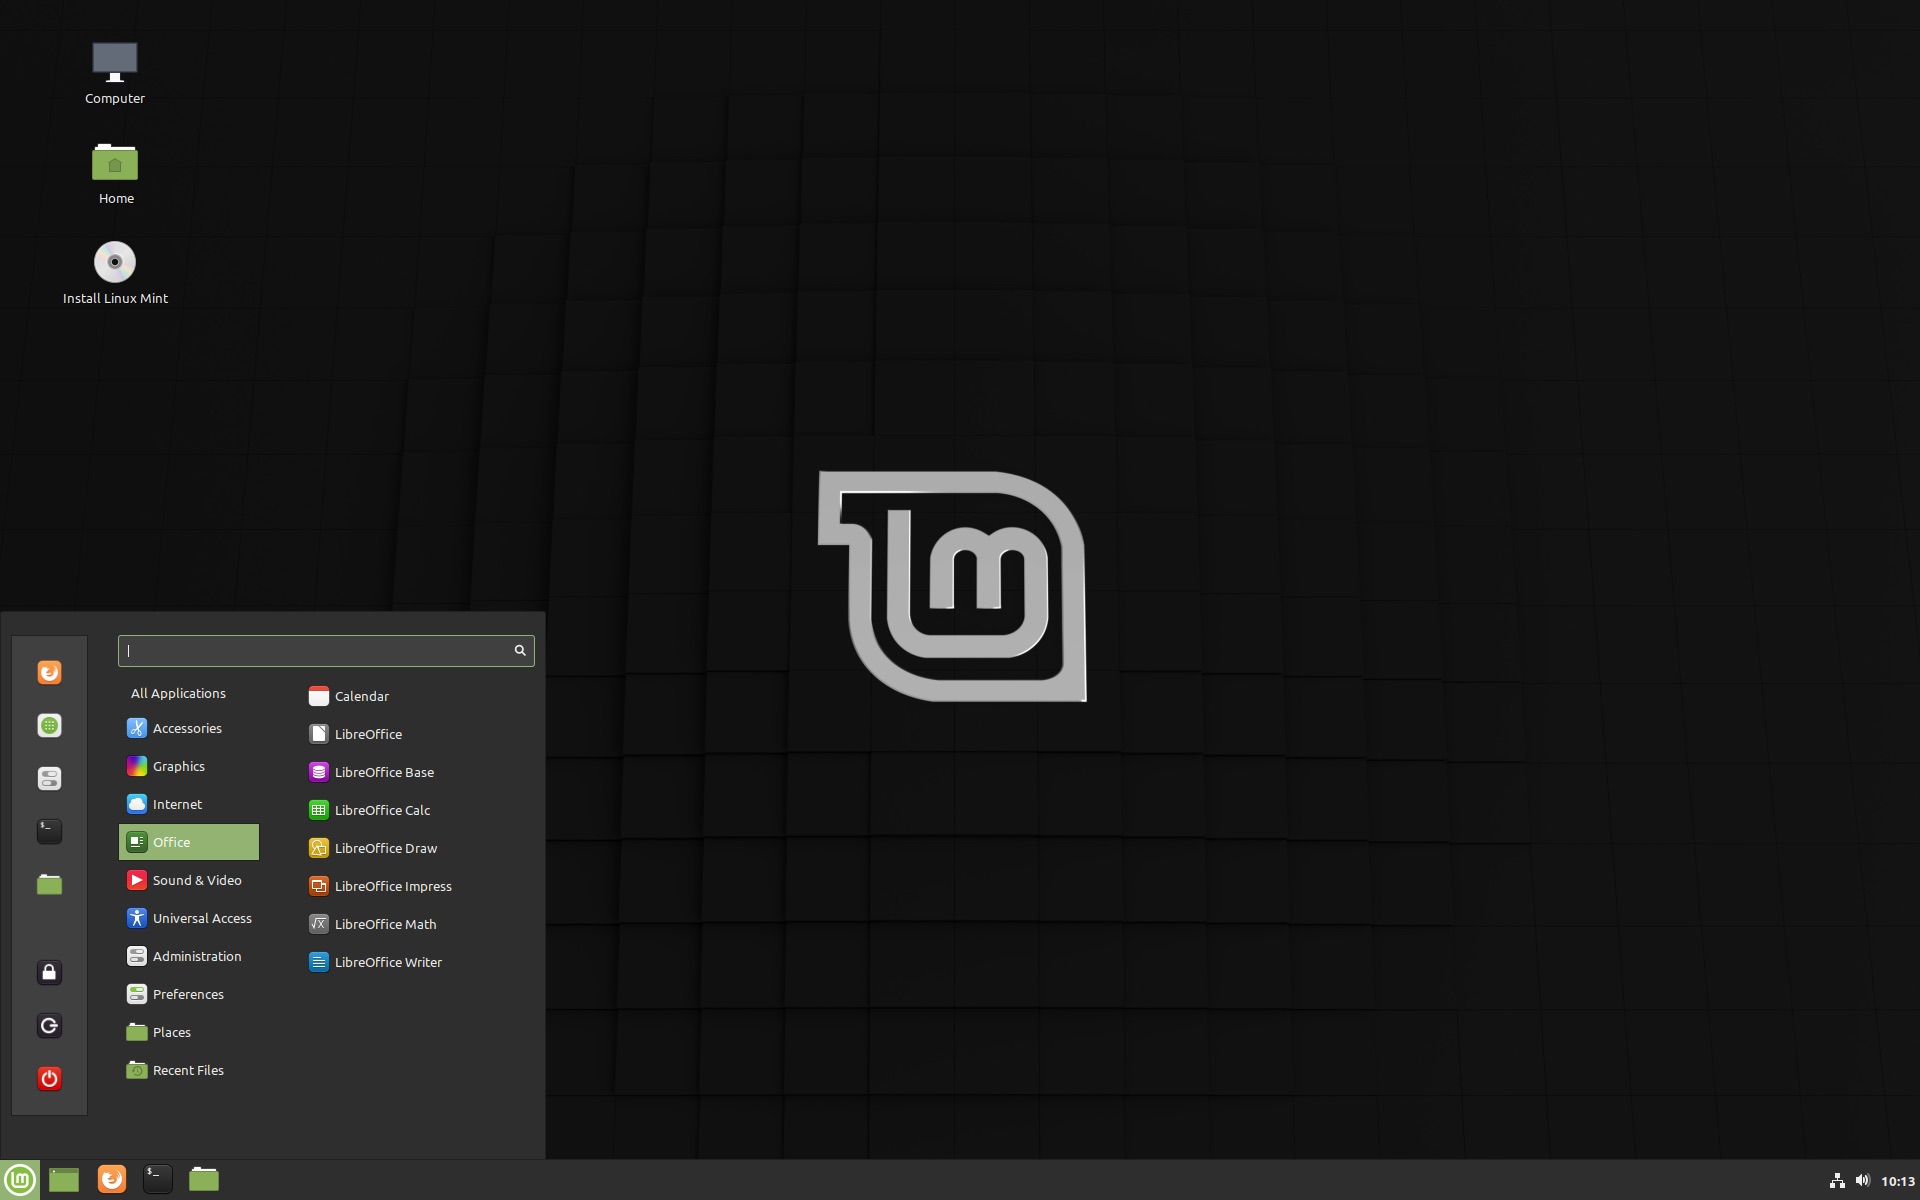 Linux Mint Debian Edition 4 “Debbie” Released, This Is What’s New